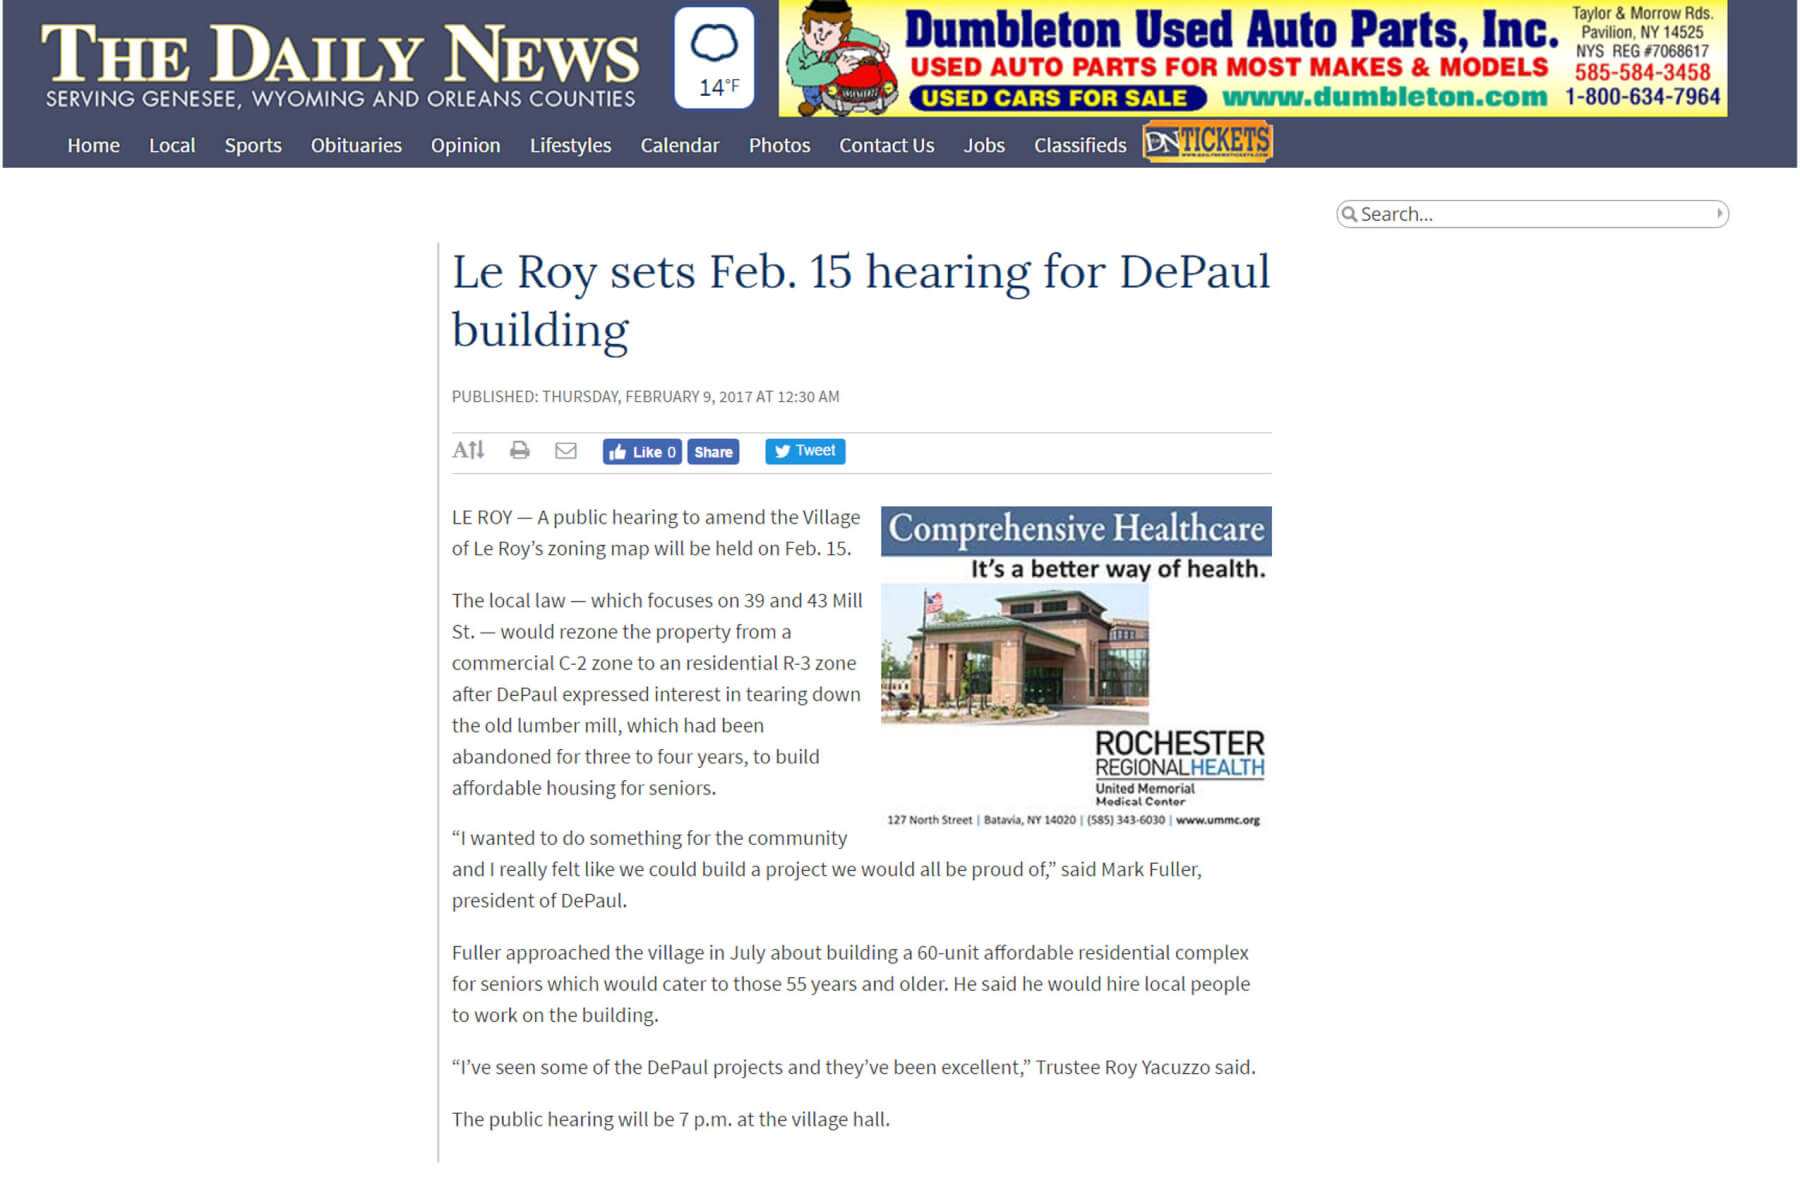 LeRoy sets Feb. 15 hearing for DePaul building article in The Daily News February 2017